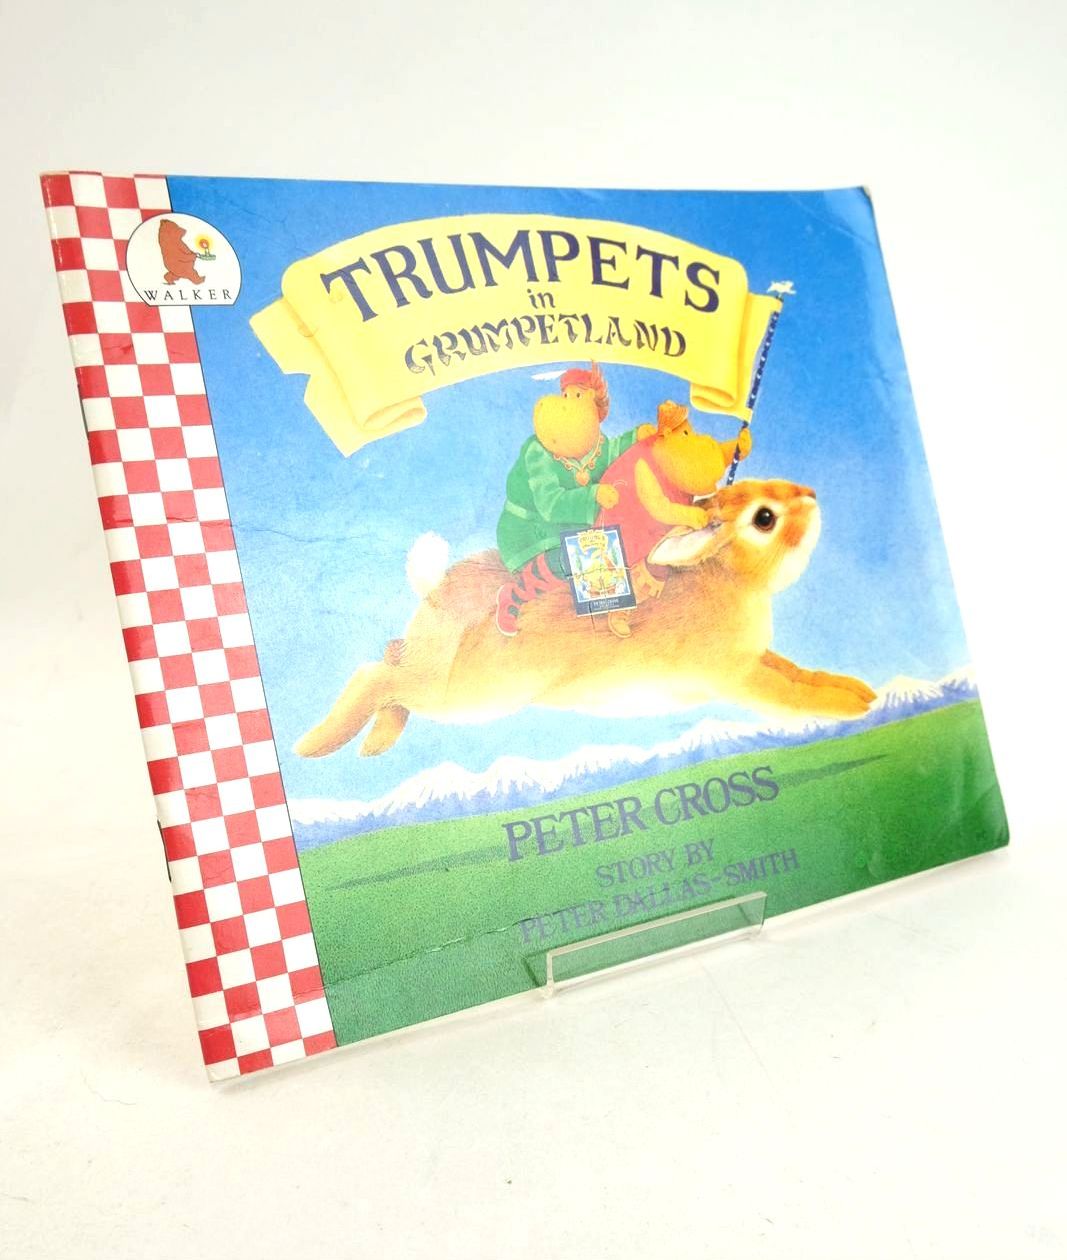 Photo of TRUMPETS IN GRUMPETLAND written by Dallas-Smith, Peter illustrated by Cross, Peter published by Walker Books (STOCK CODE: 1327481)  for sale by Stella & Rose's Books